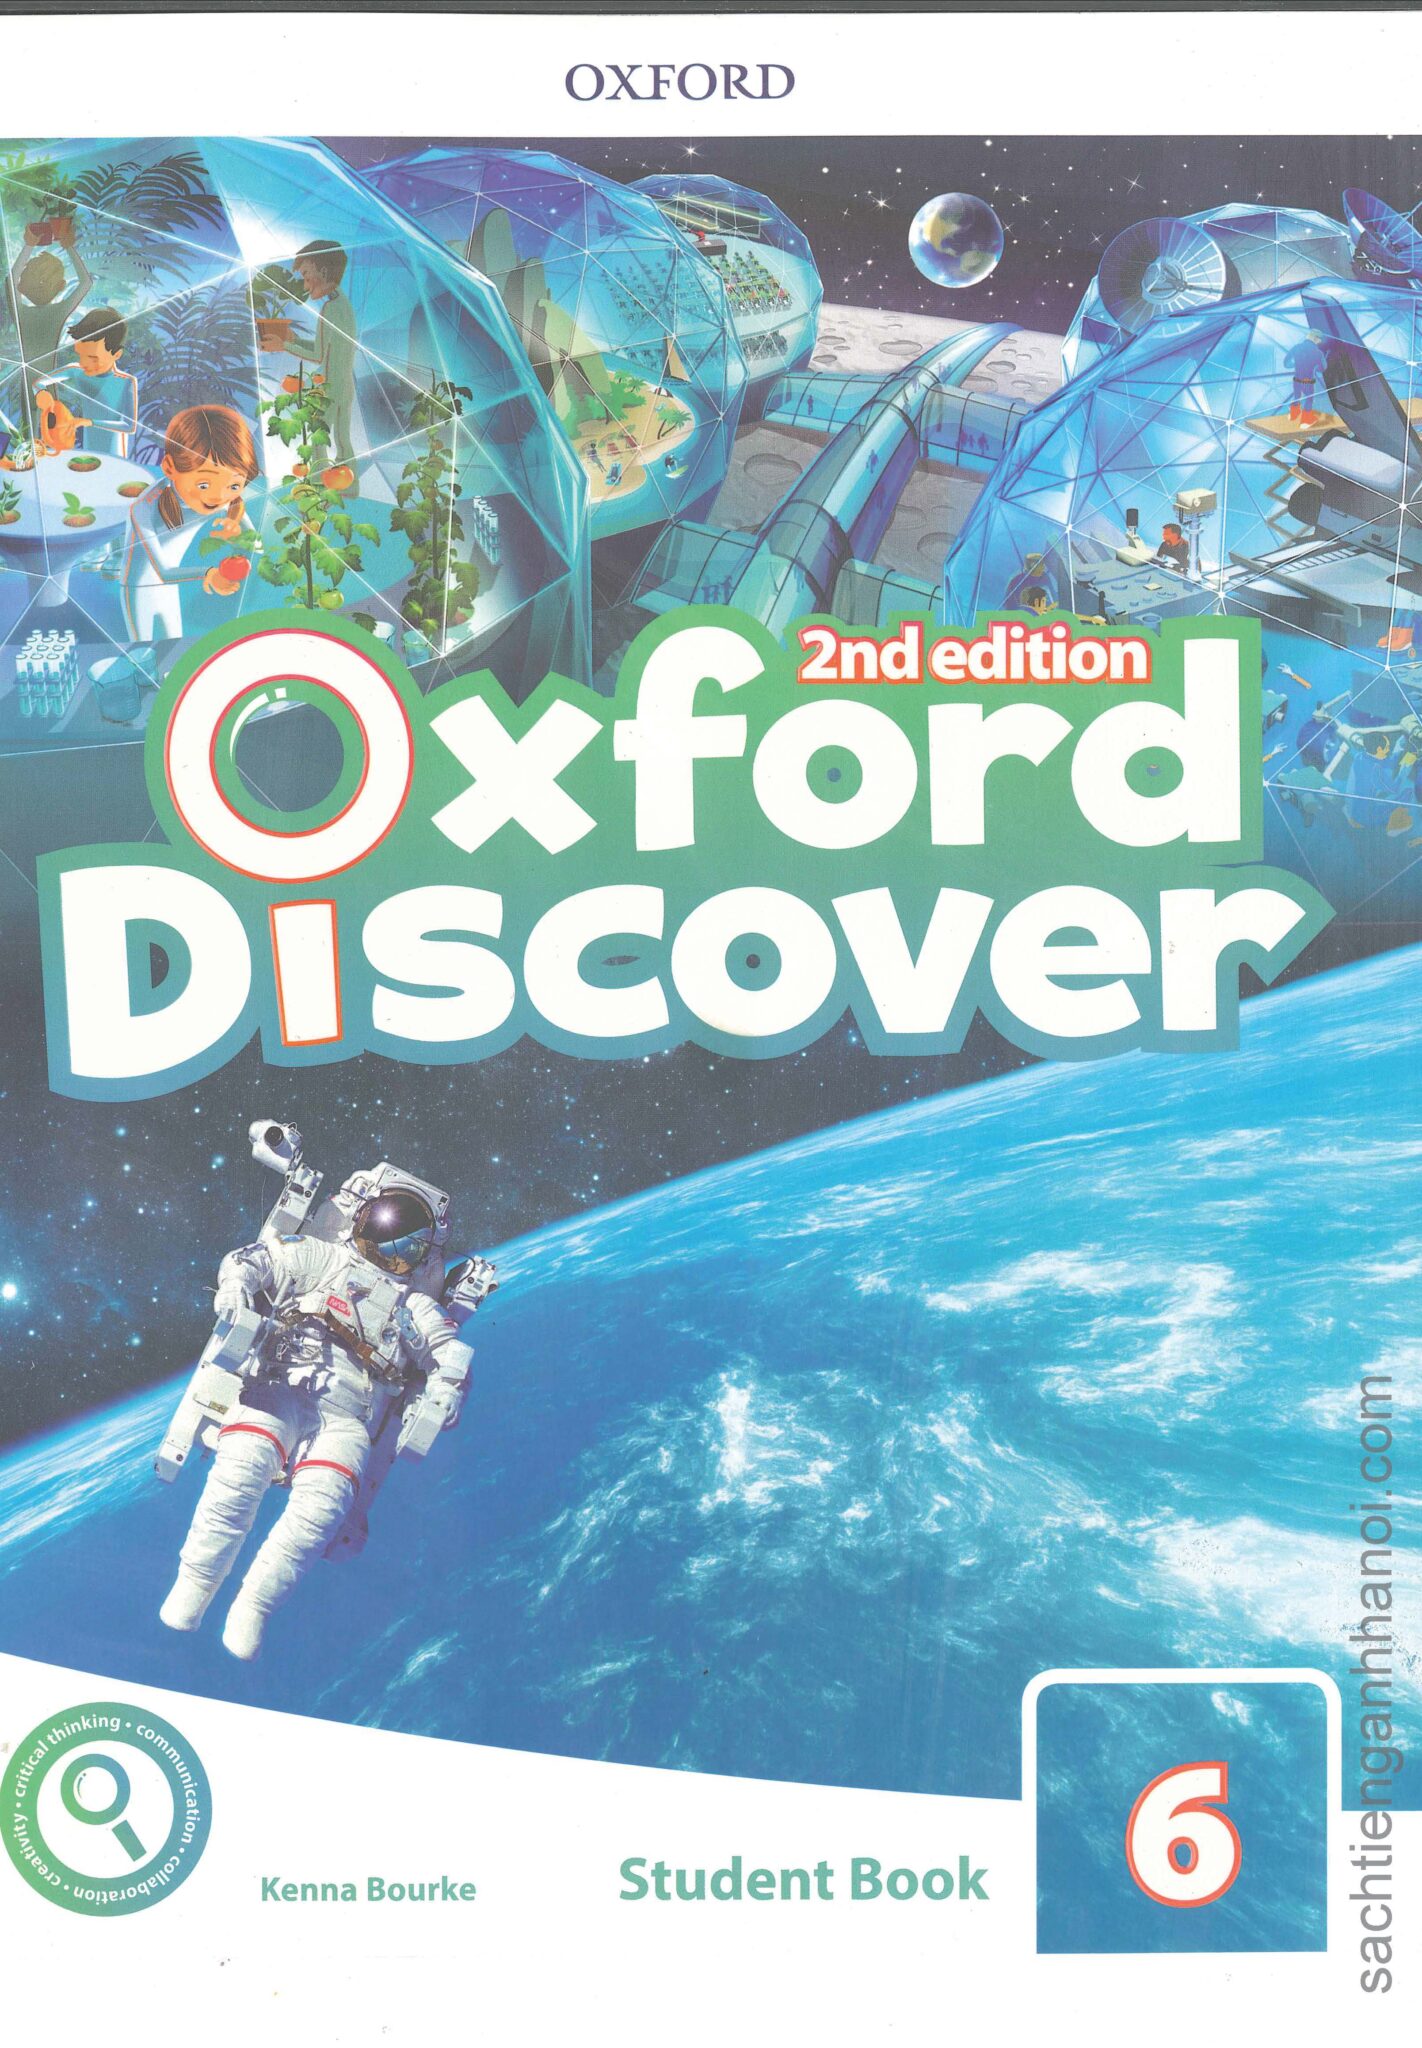 Oxford discover book. Oxford discover 1 student book 2nd Edition Audio. Oxford discover 1 student's book 2nd Edition. Oxford discover 2 Edition 2. Workbook second Edition Oxford discover.